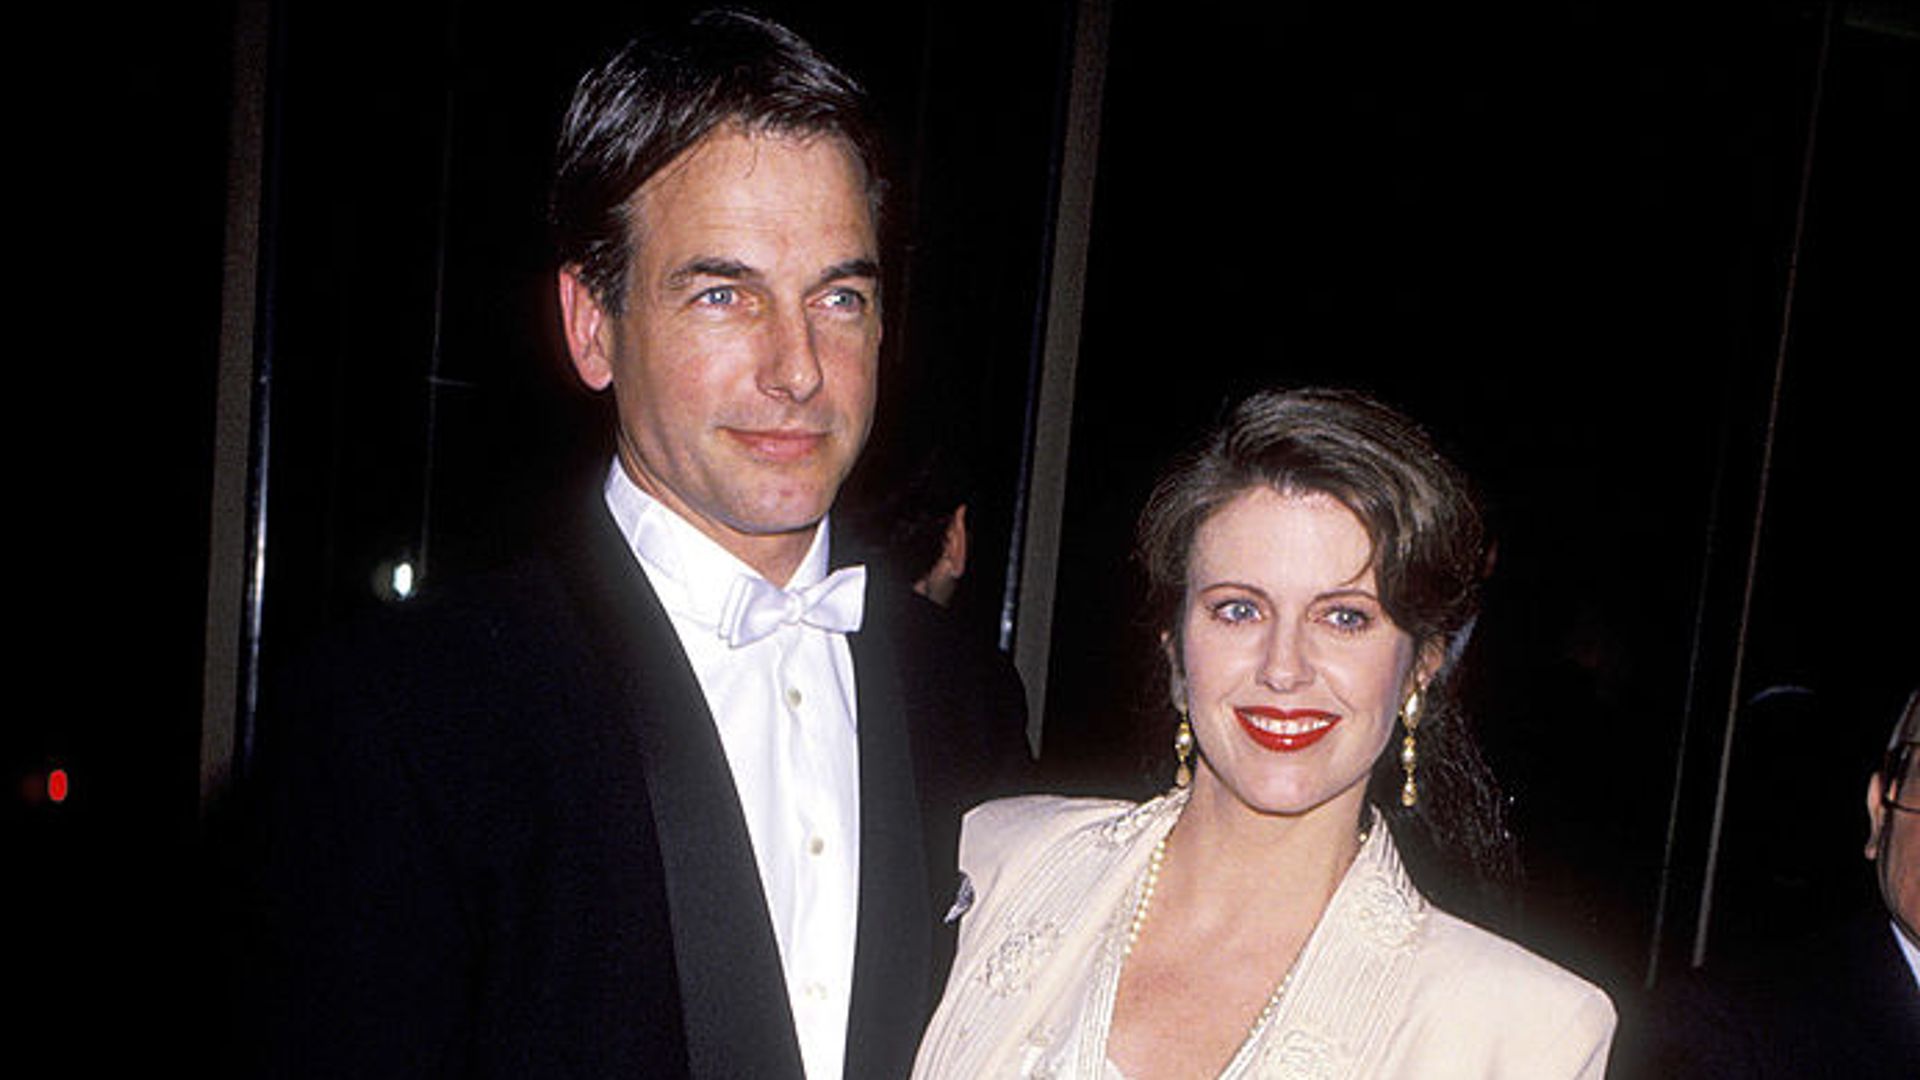  Mark Harmon and Pam Dawber at the 49th Annual Golden Globe Awards